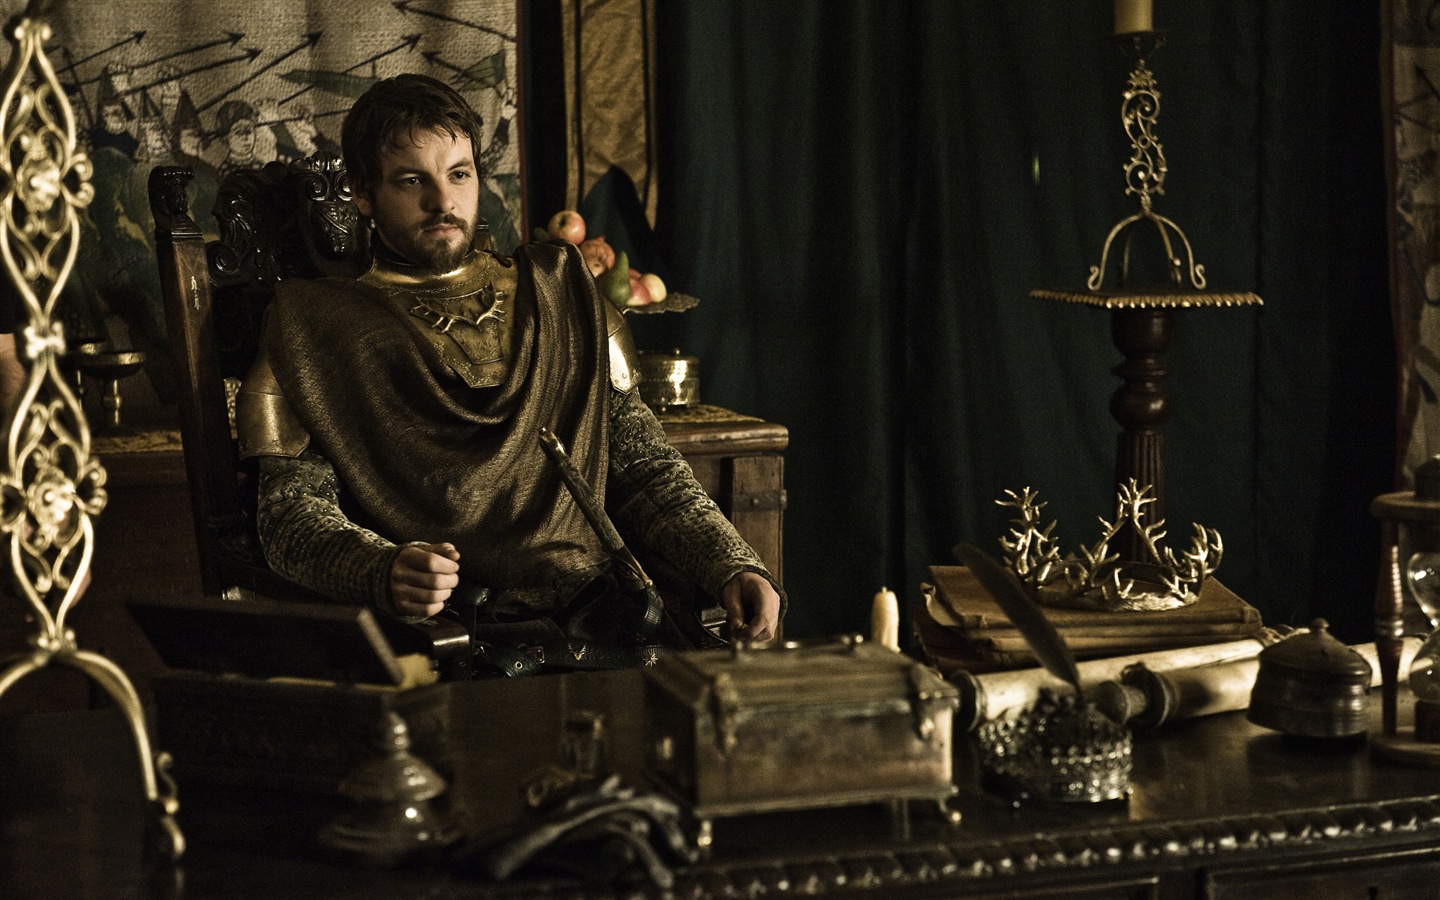 A Song of Ice and Fire: Game of Thrones 冰與火之歌：權力的遊戲高清壁紙 #27 - 1440x900